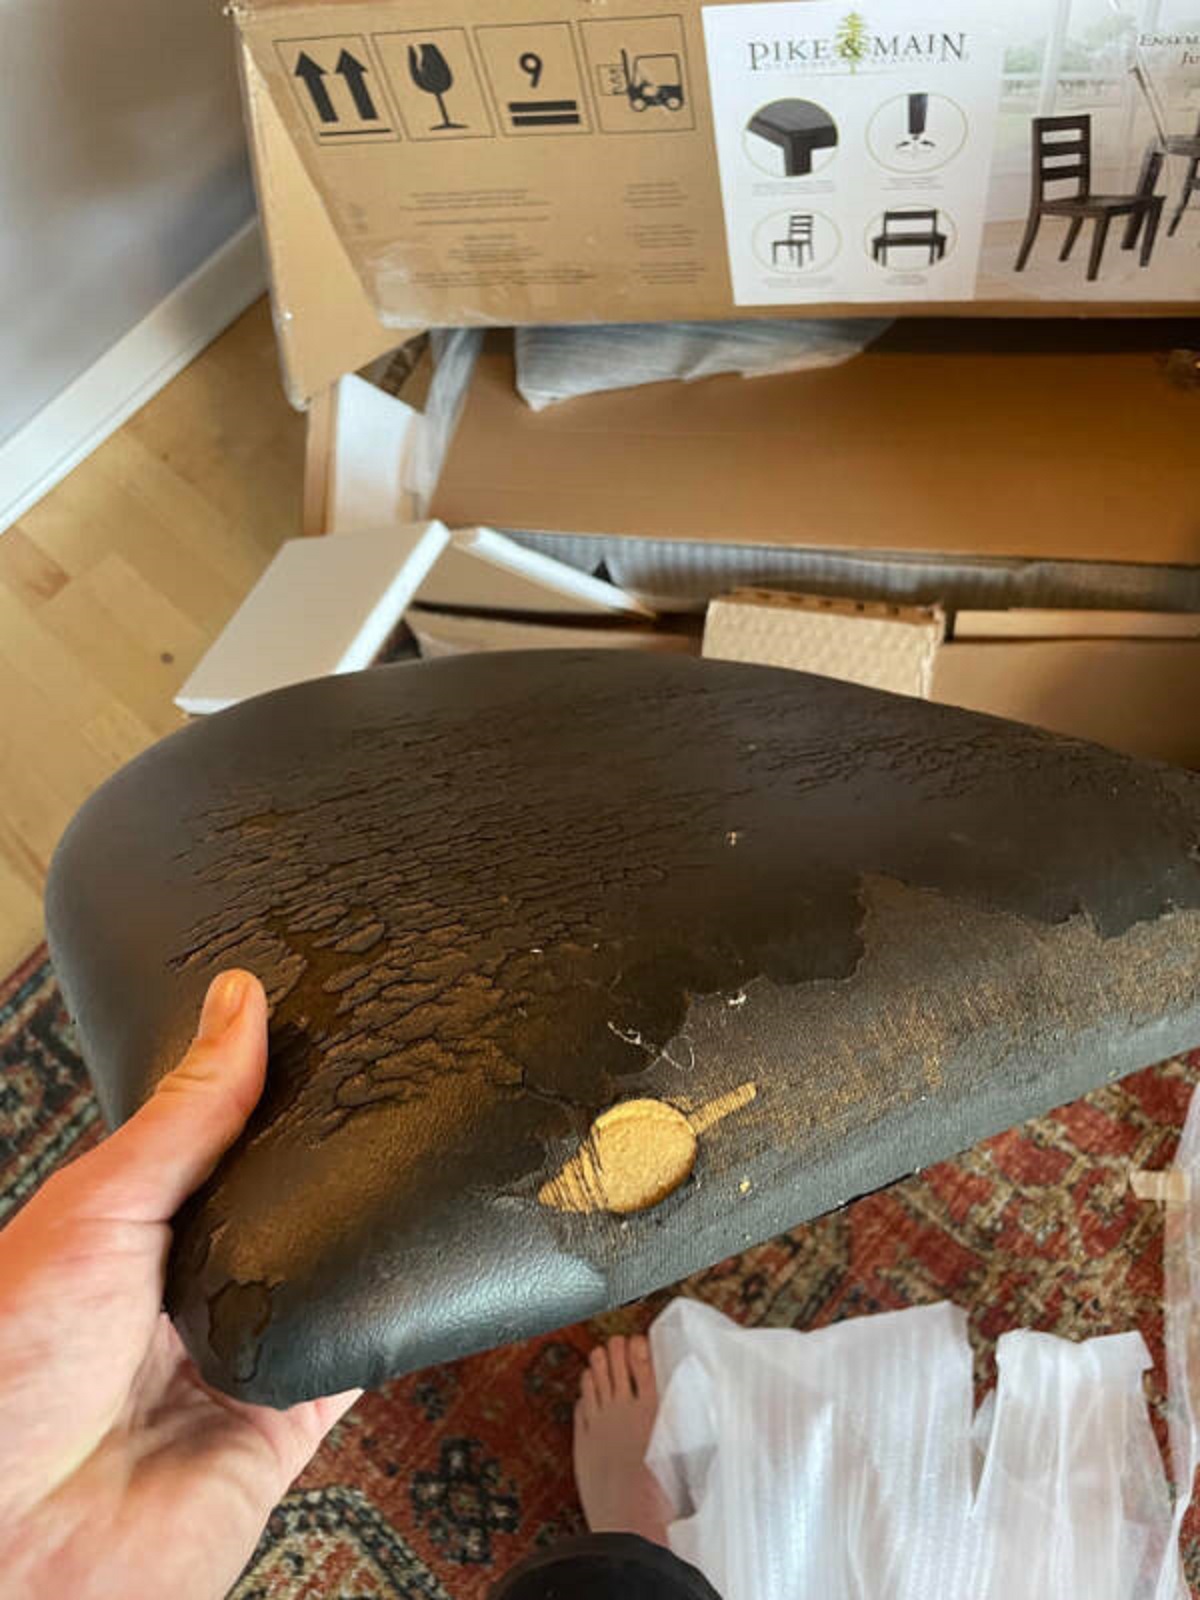 “It seems that someone purchased the same dining set, replaced it with their used and smoke infused seats, then returned it. Costco must’ve restocked it without inspecting it for the next unlucky customer (me).”